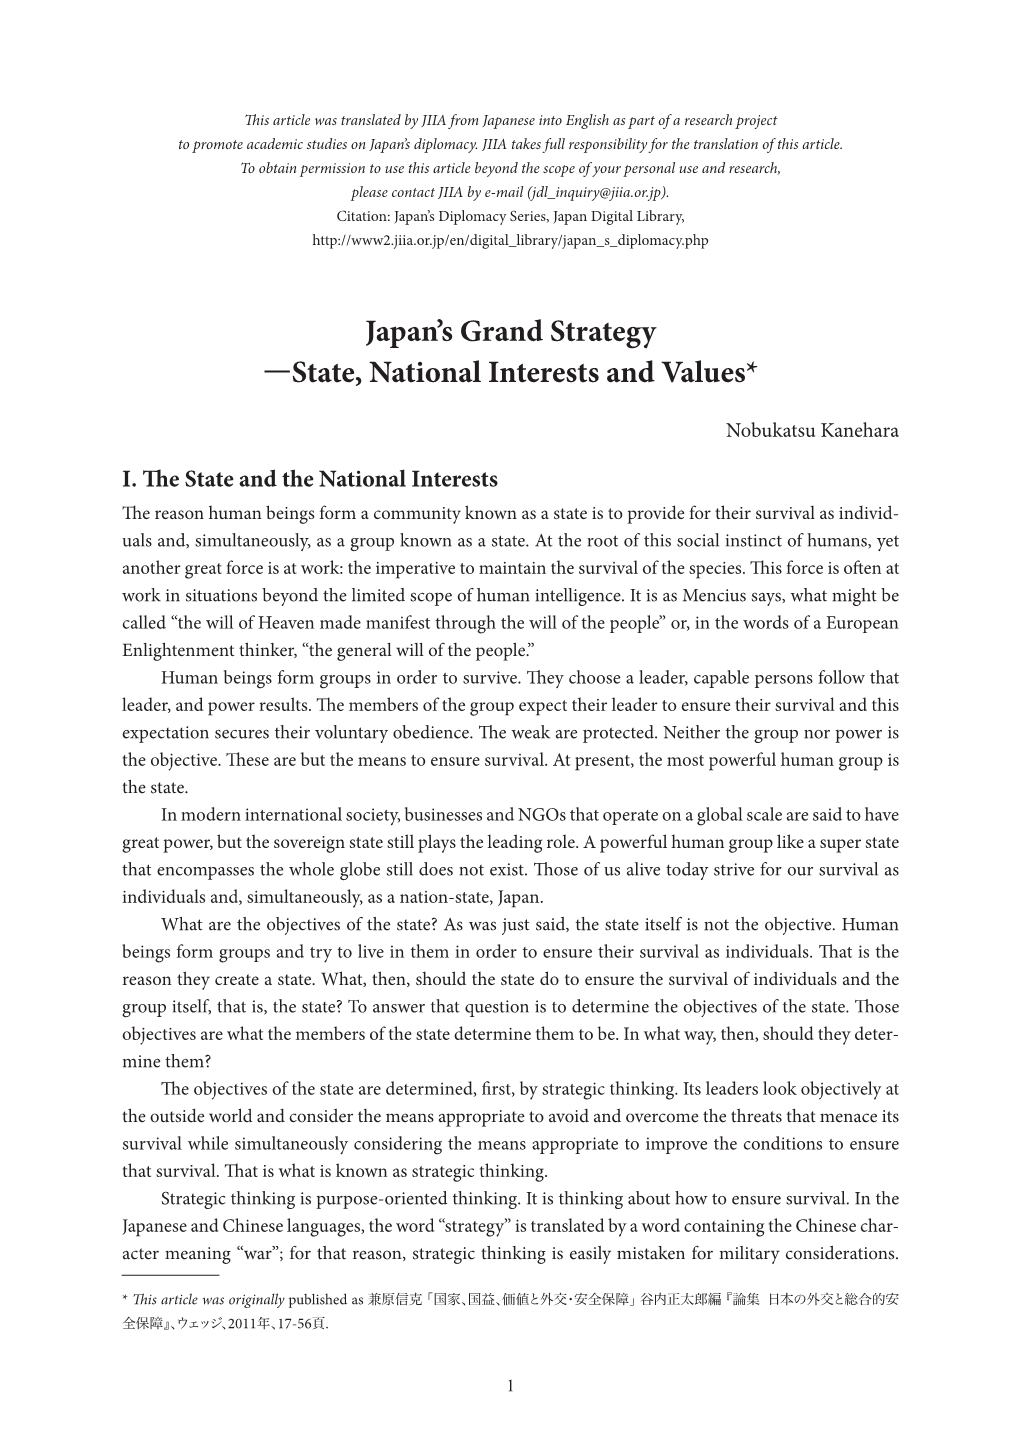 Japan's Grand Strategy